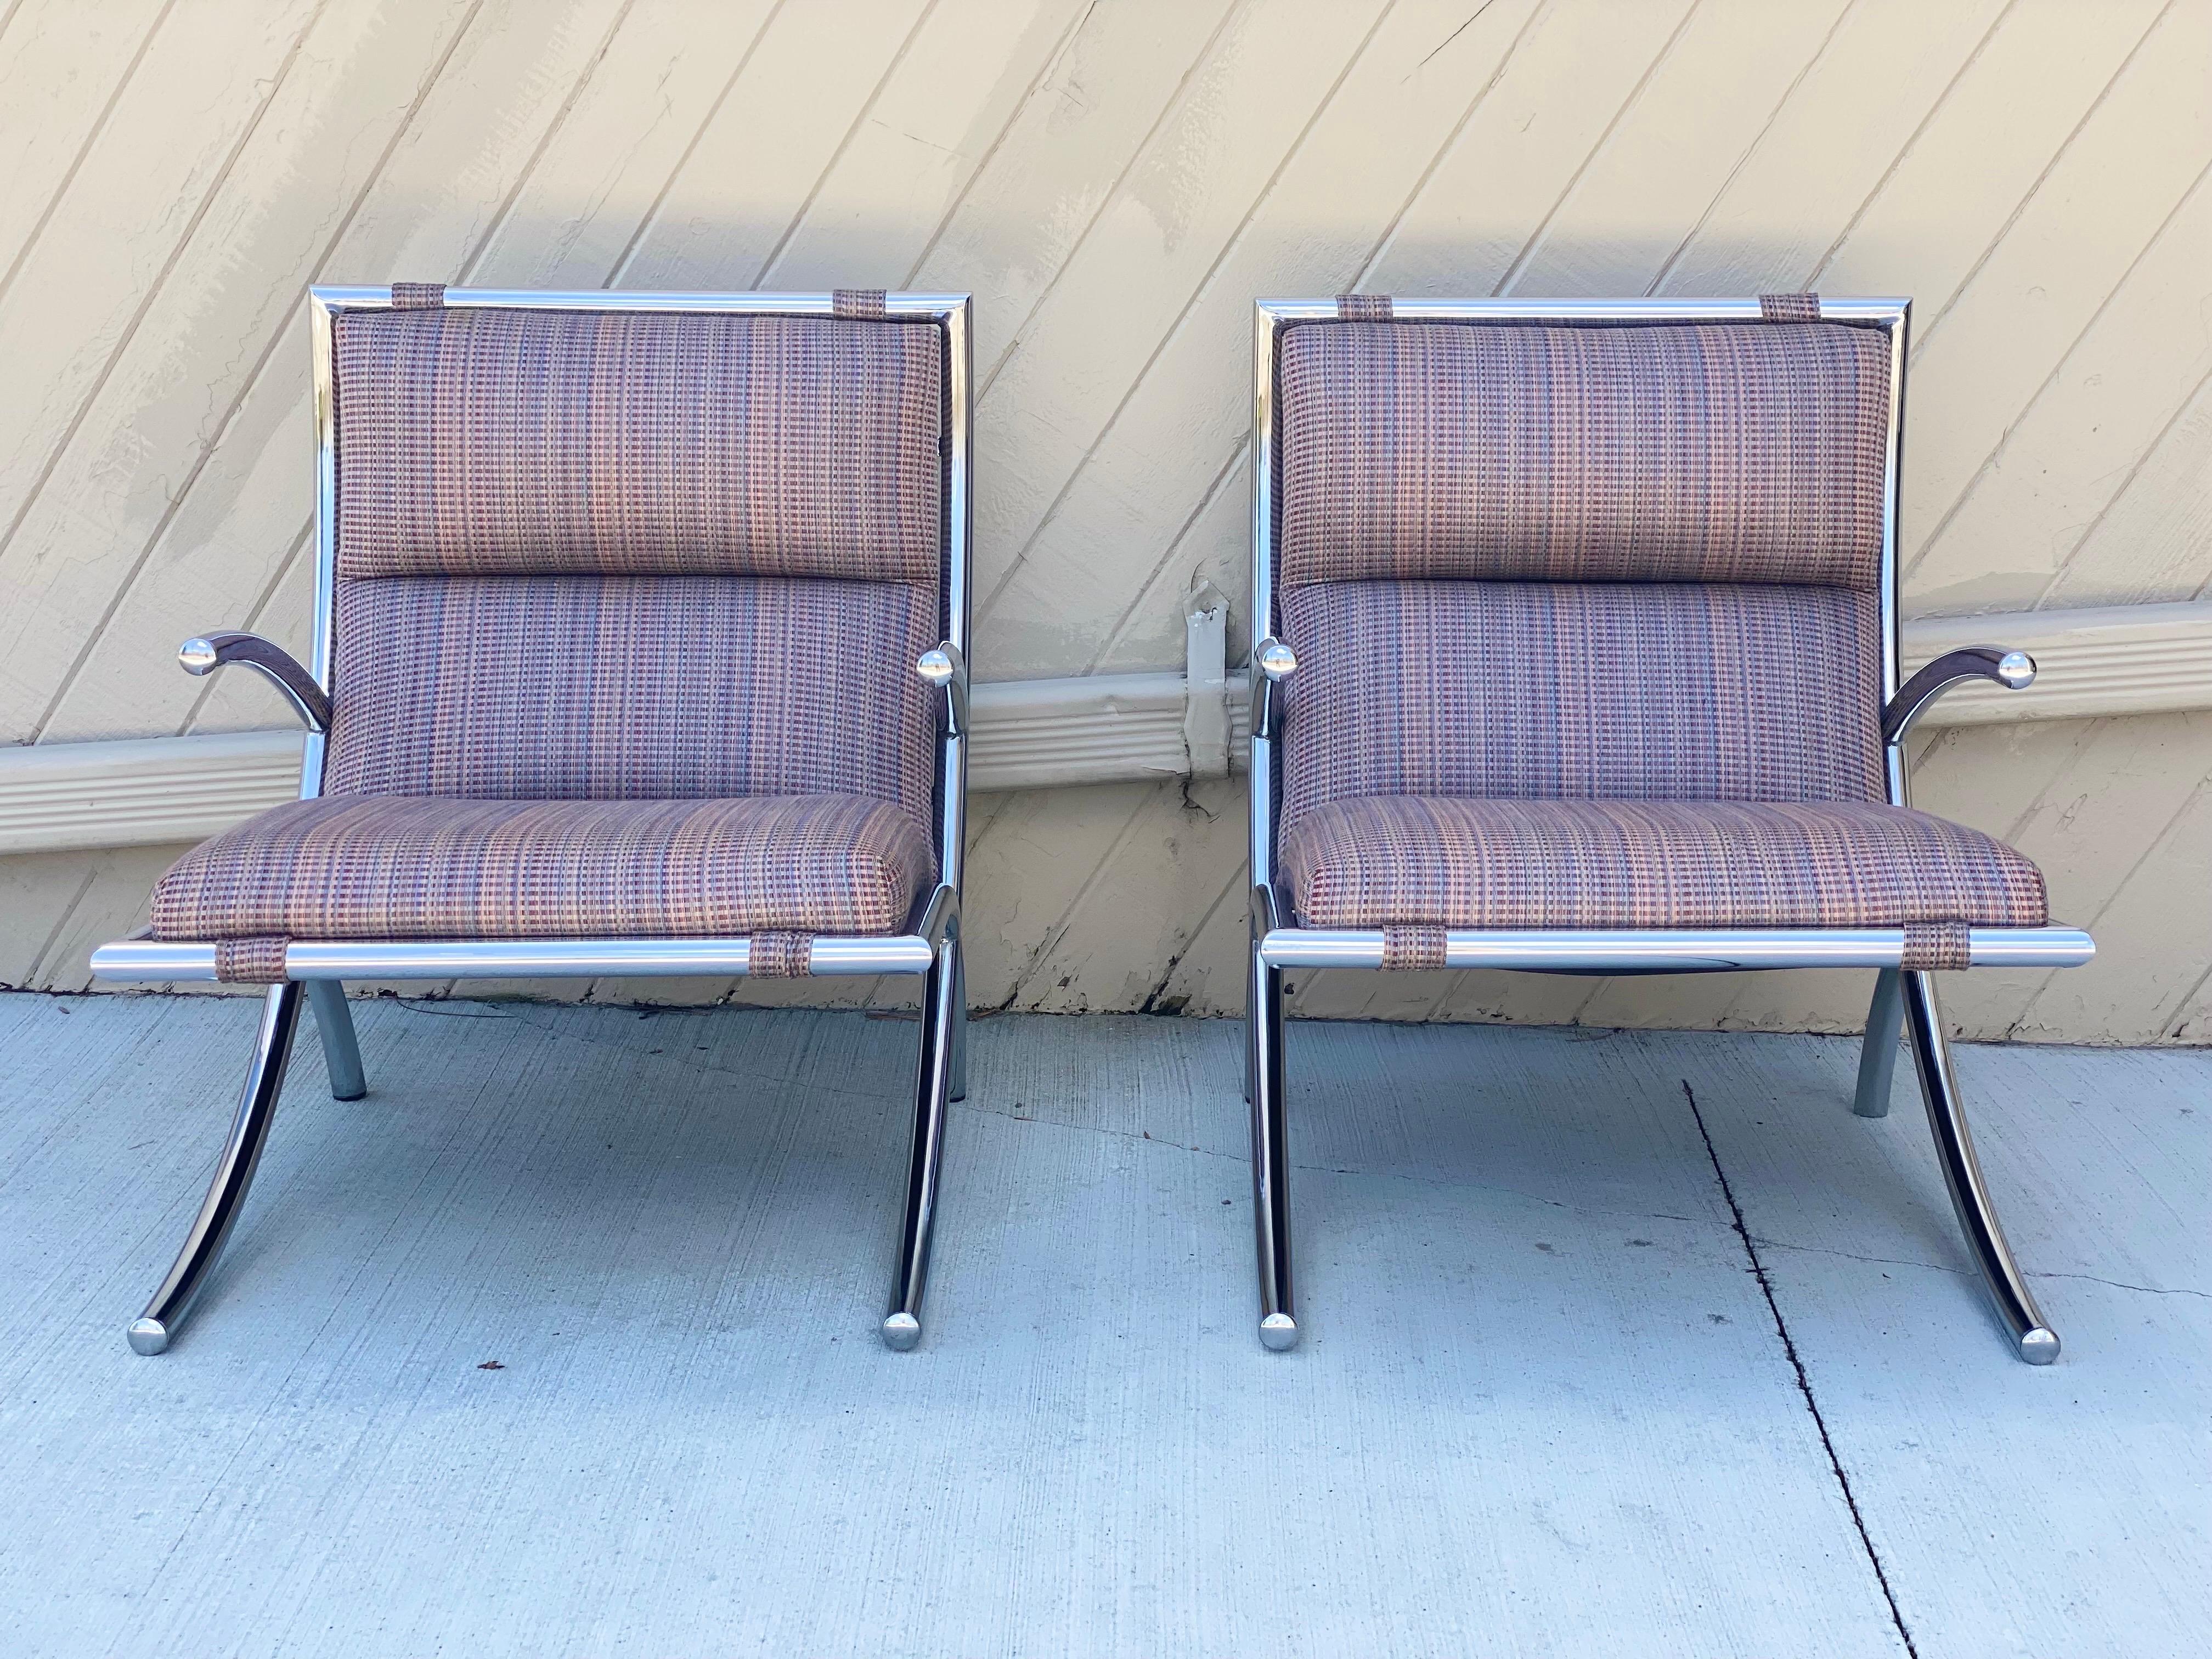 We are very pleased to offer a beautiful Italian set of lounge armchairs, circa the 1950s. These minimal, mid-century chairs showcase clean lines and a distinct, geometric frame constructed of tubular, polished chrome. The criss-crossed base adds a